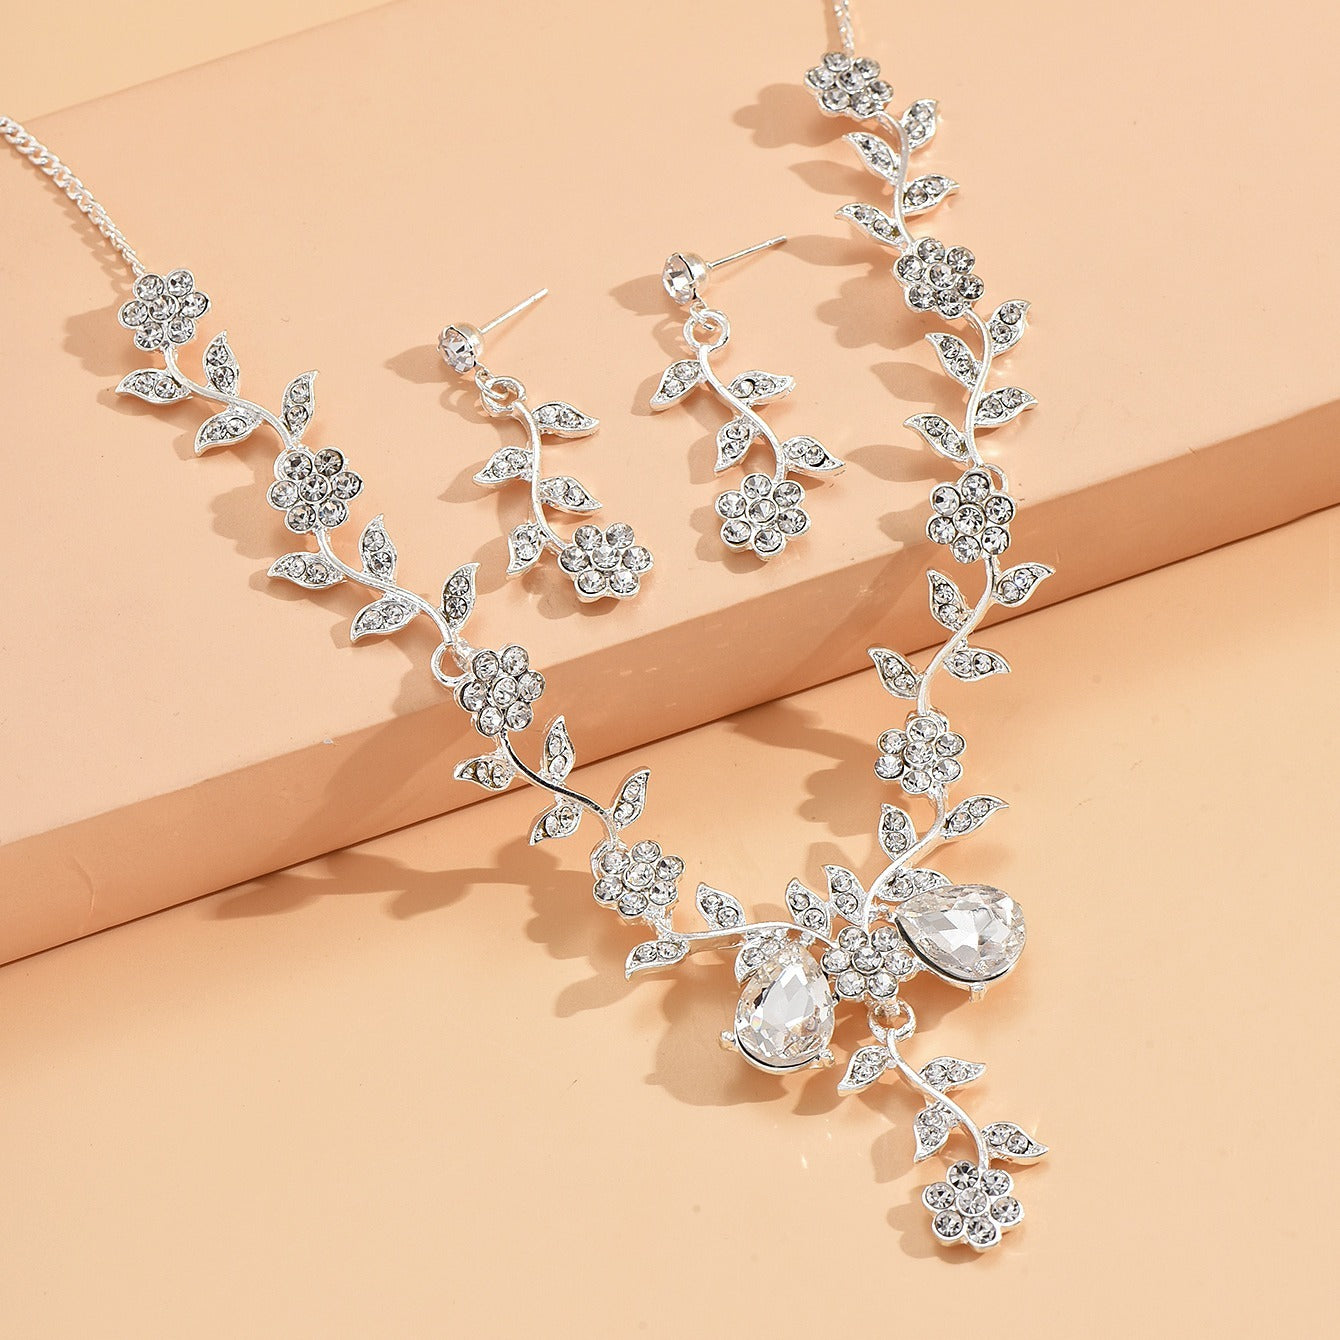 Bride Wedding Jewelry Sets Flower Crystal Bridal Necklace & Earrings Set Leaf Shape Prom Costume Jewelry Set Rhinestone Pendant Necklace For Women And Girls Xmas Gift